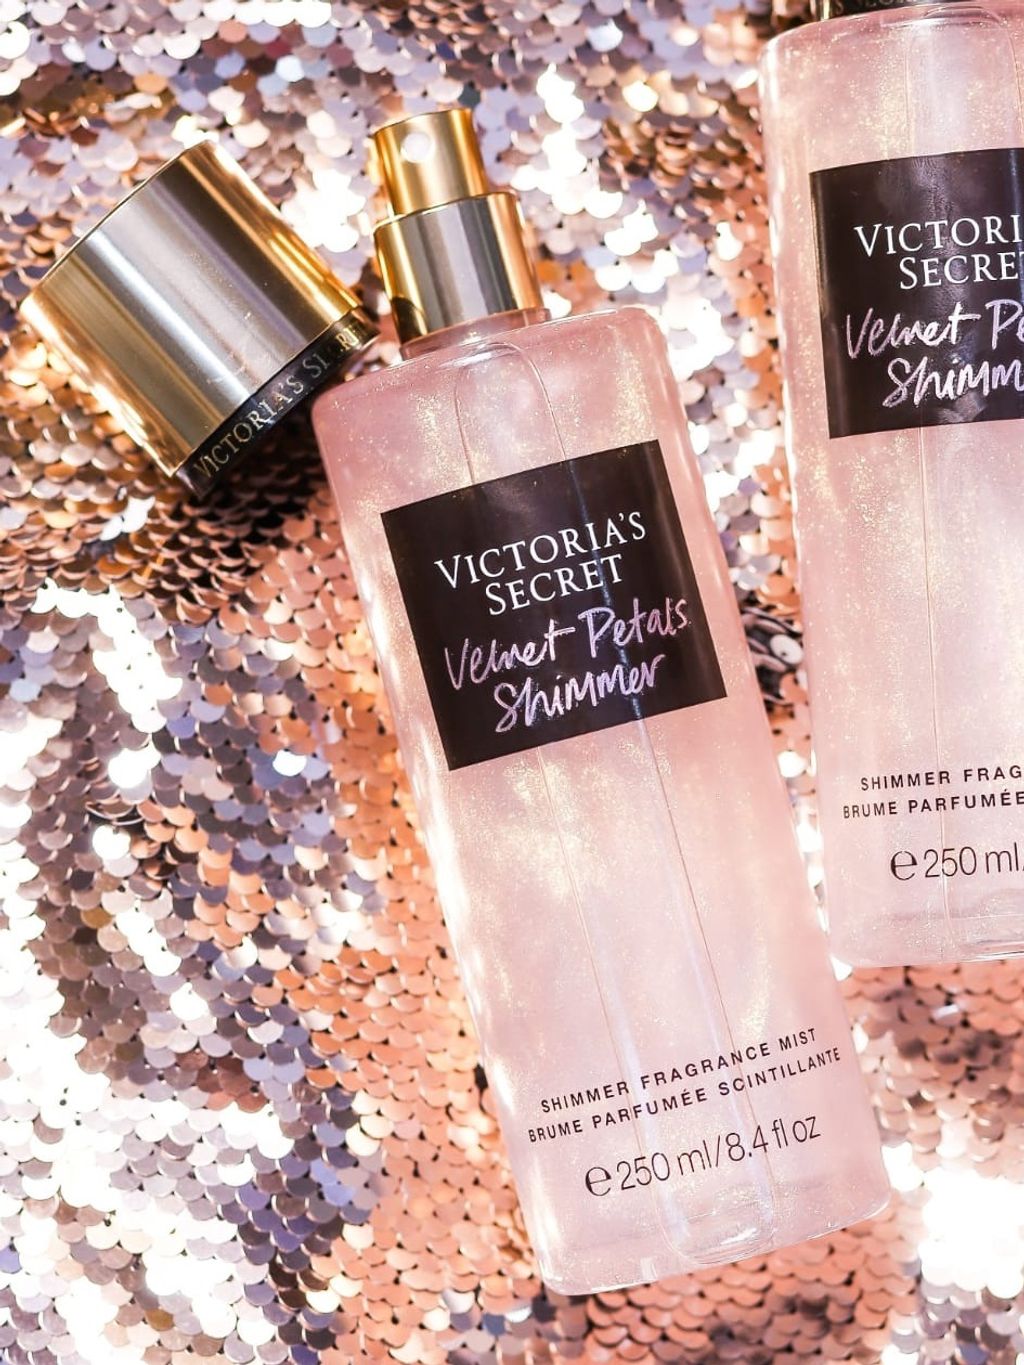  Victoria's Secret Velvet Petals Body Shimmer Mist,  Perfume/Spray with Notes of Lush Blooms and Almond Glaze, Made you Shimmer  Women's Fragrance - 250 ml / 8.4 oz : Beauty & Personal Care